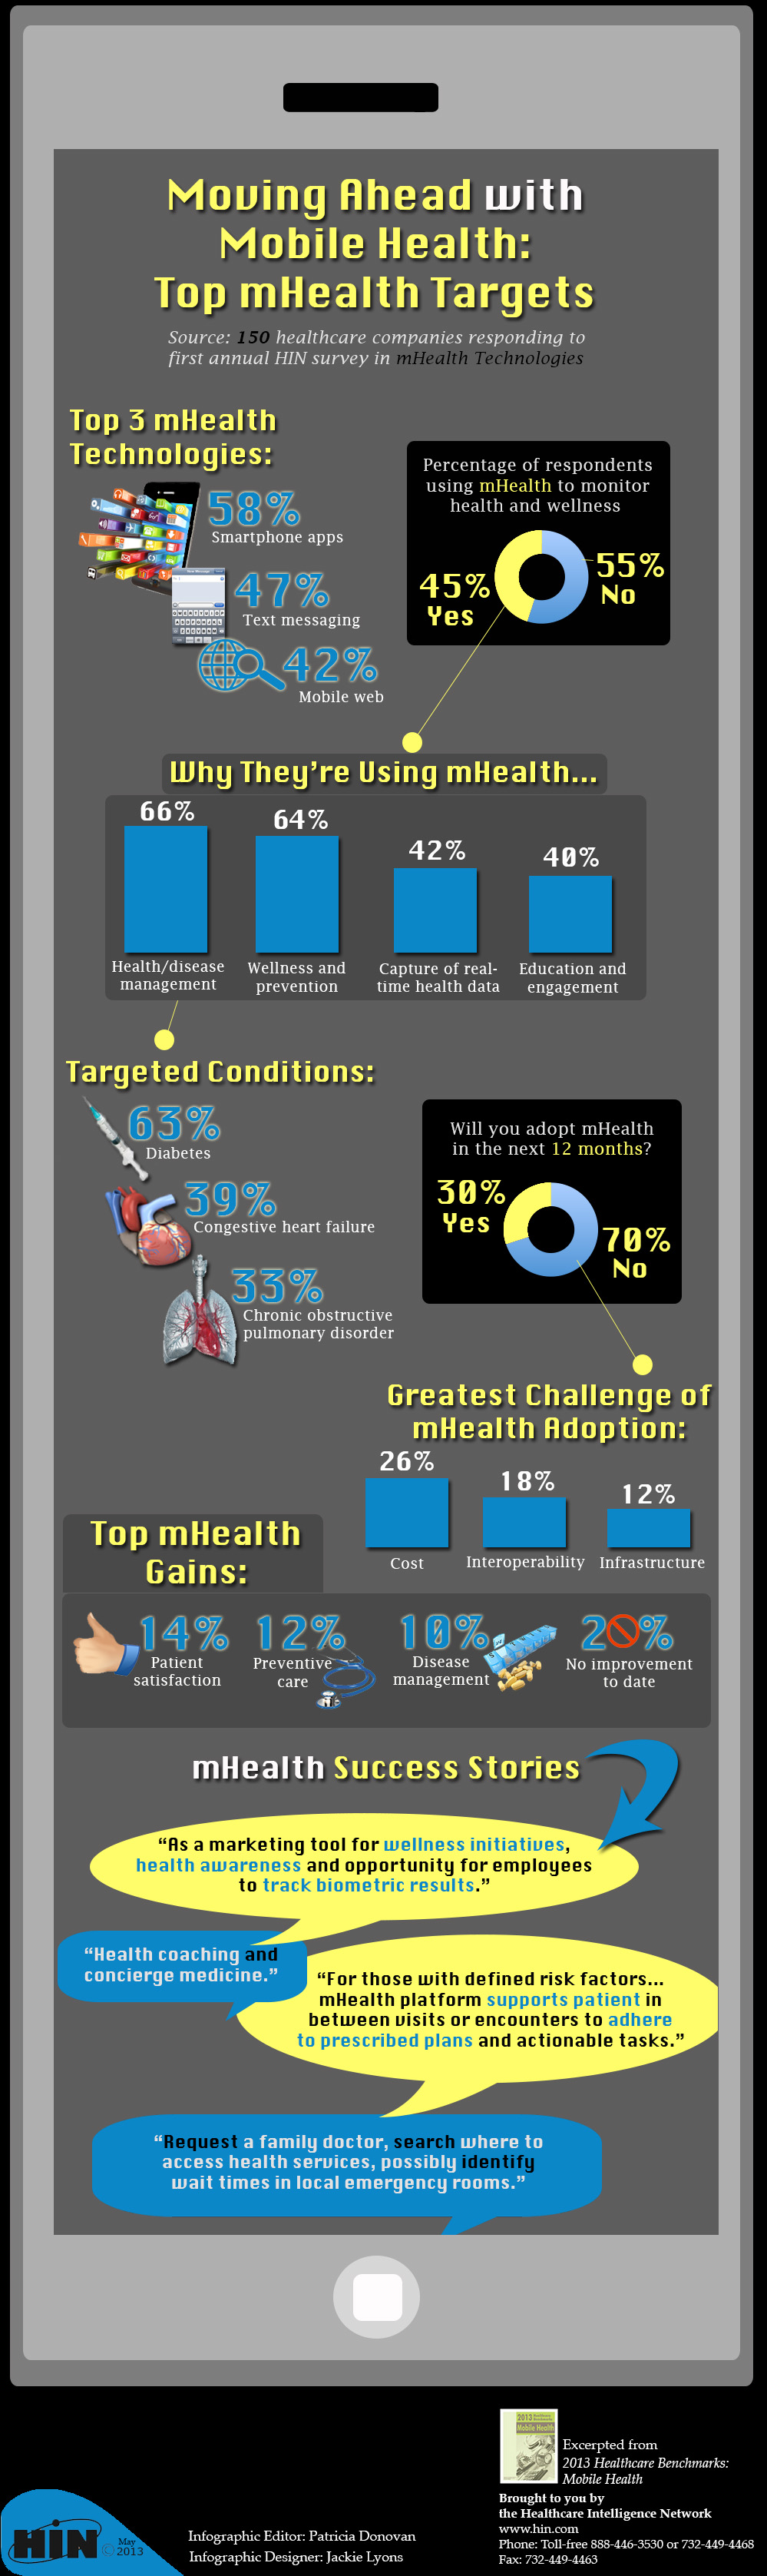 Mobile Health in 2013